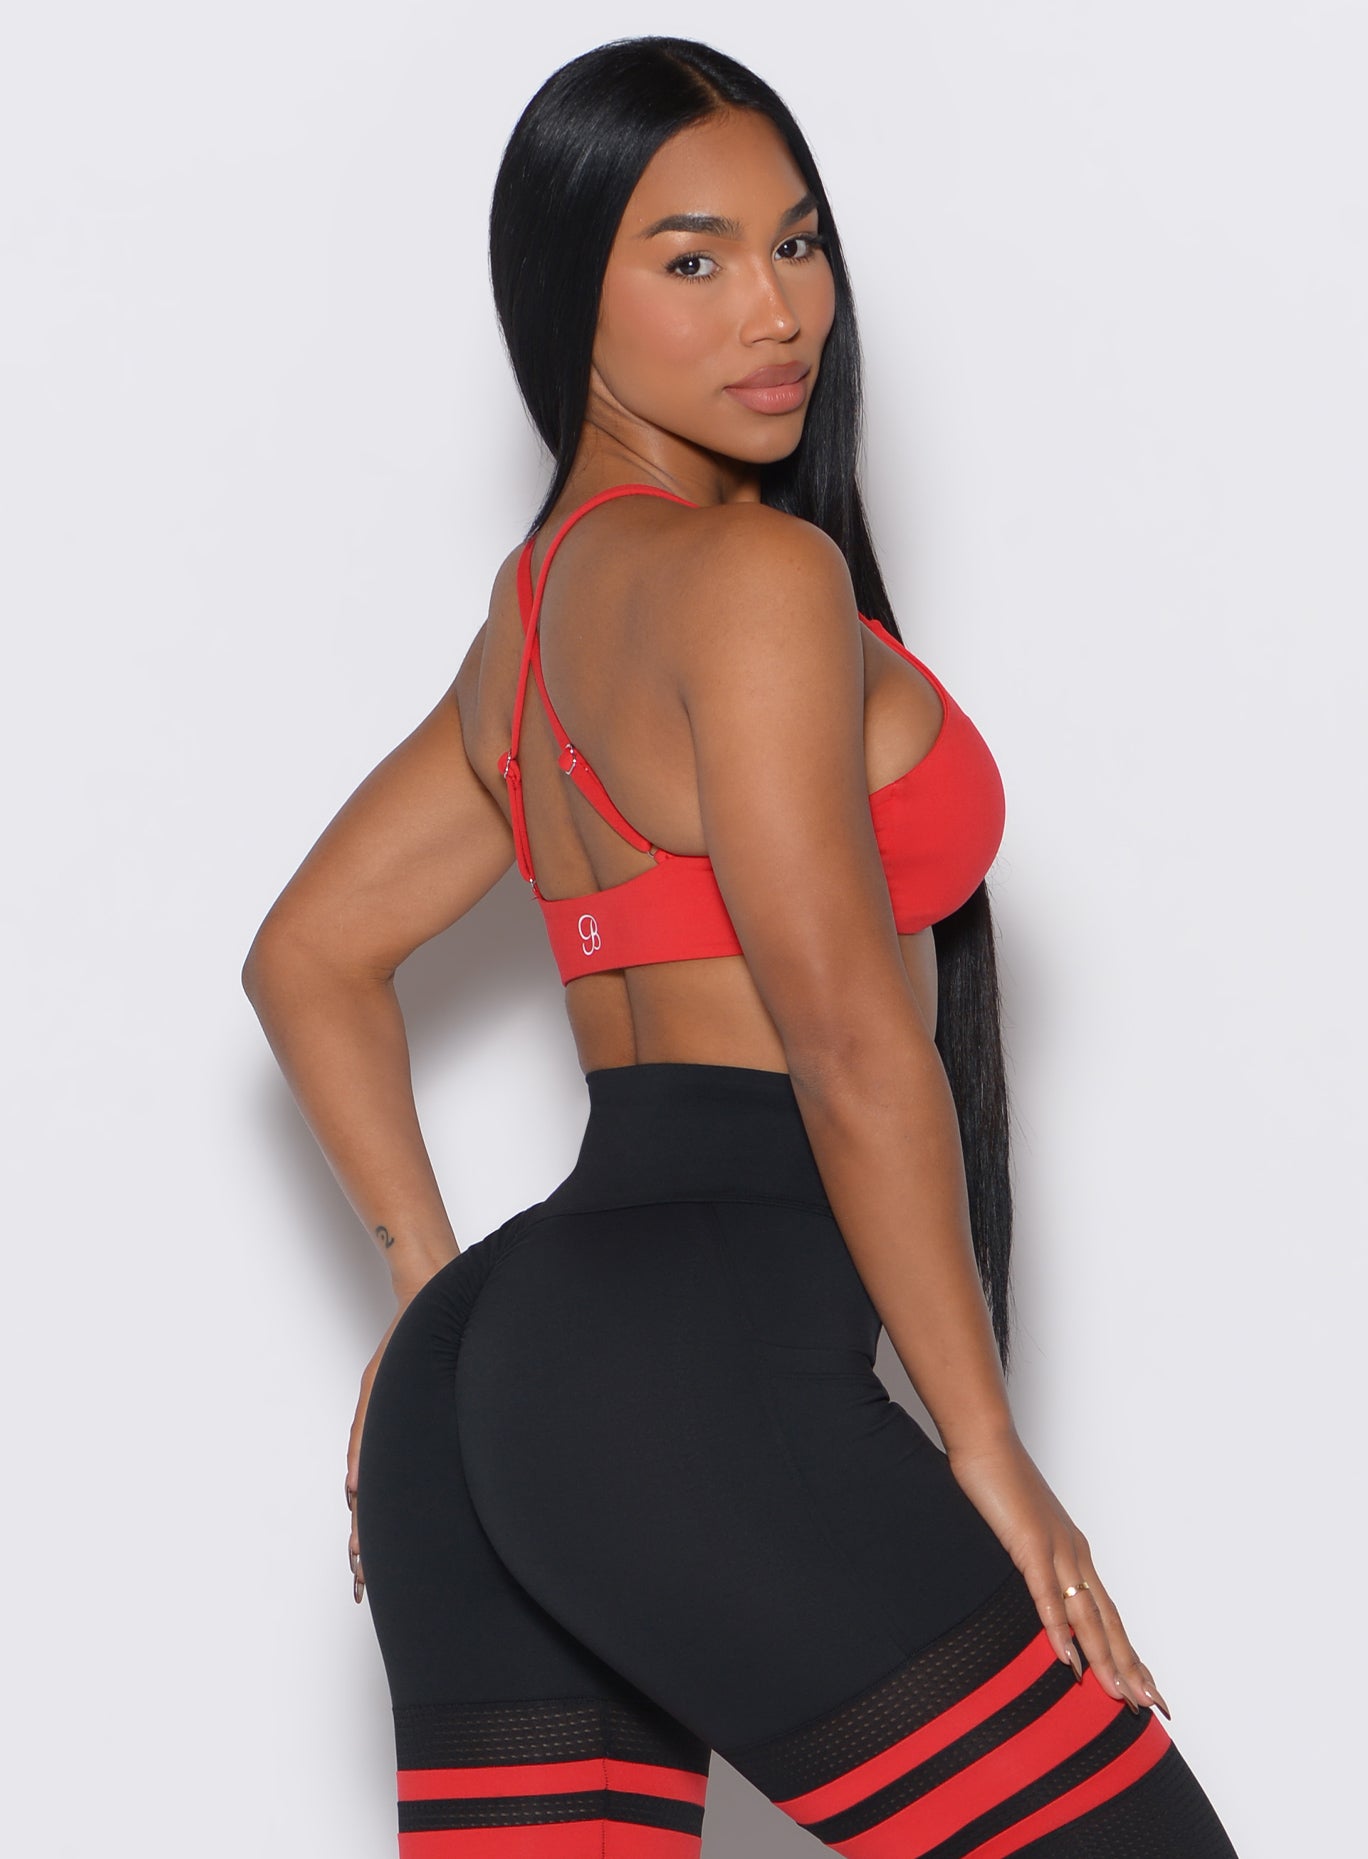 Back right-side profile shot of a model wearing the Twist Mini Bra in Fire color complemented by a matching thigh high